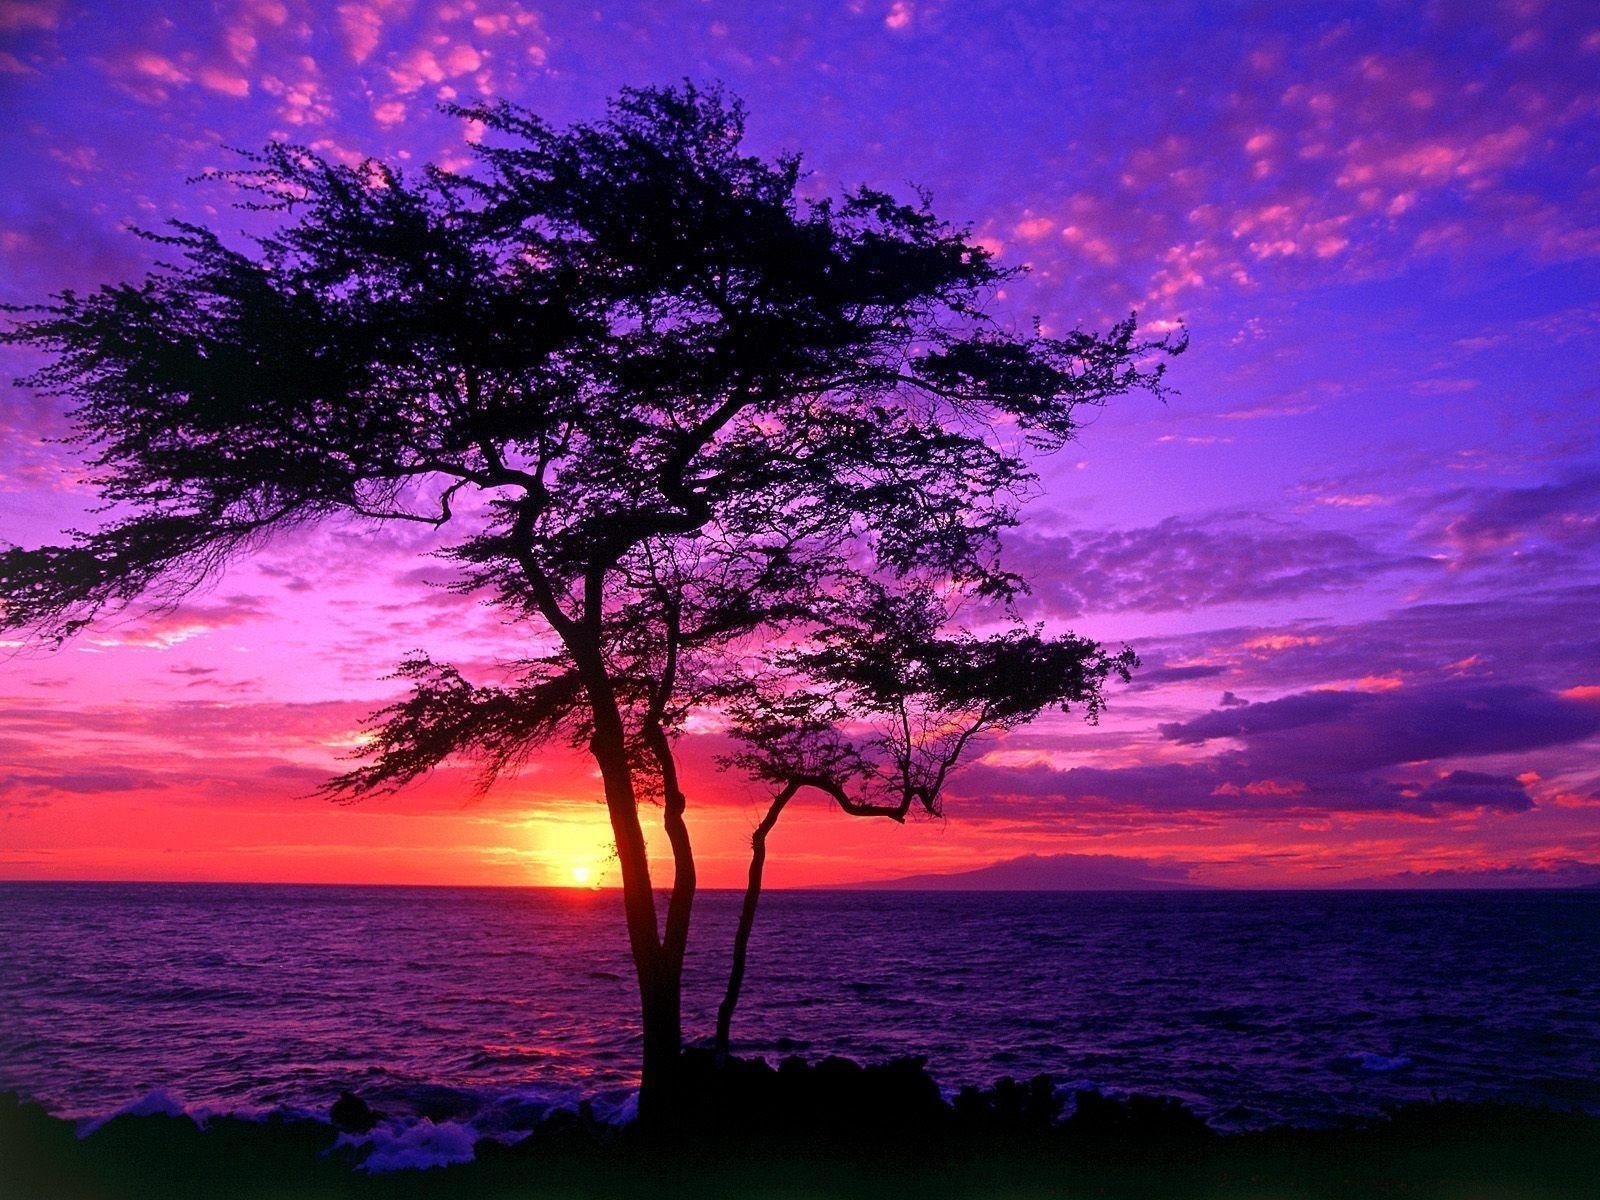 Tree silhouette in the purple sunset Wallpaper. High Quality